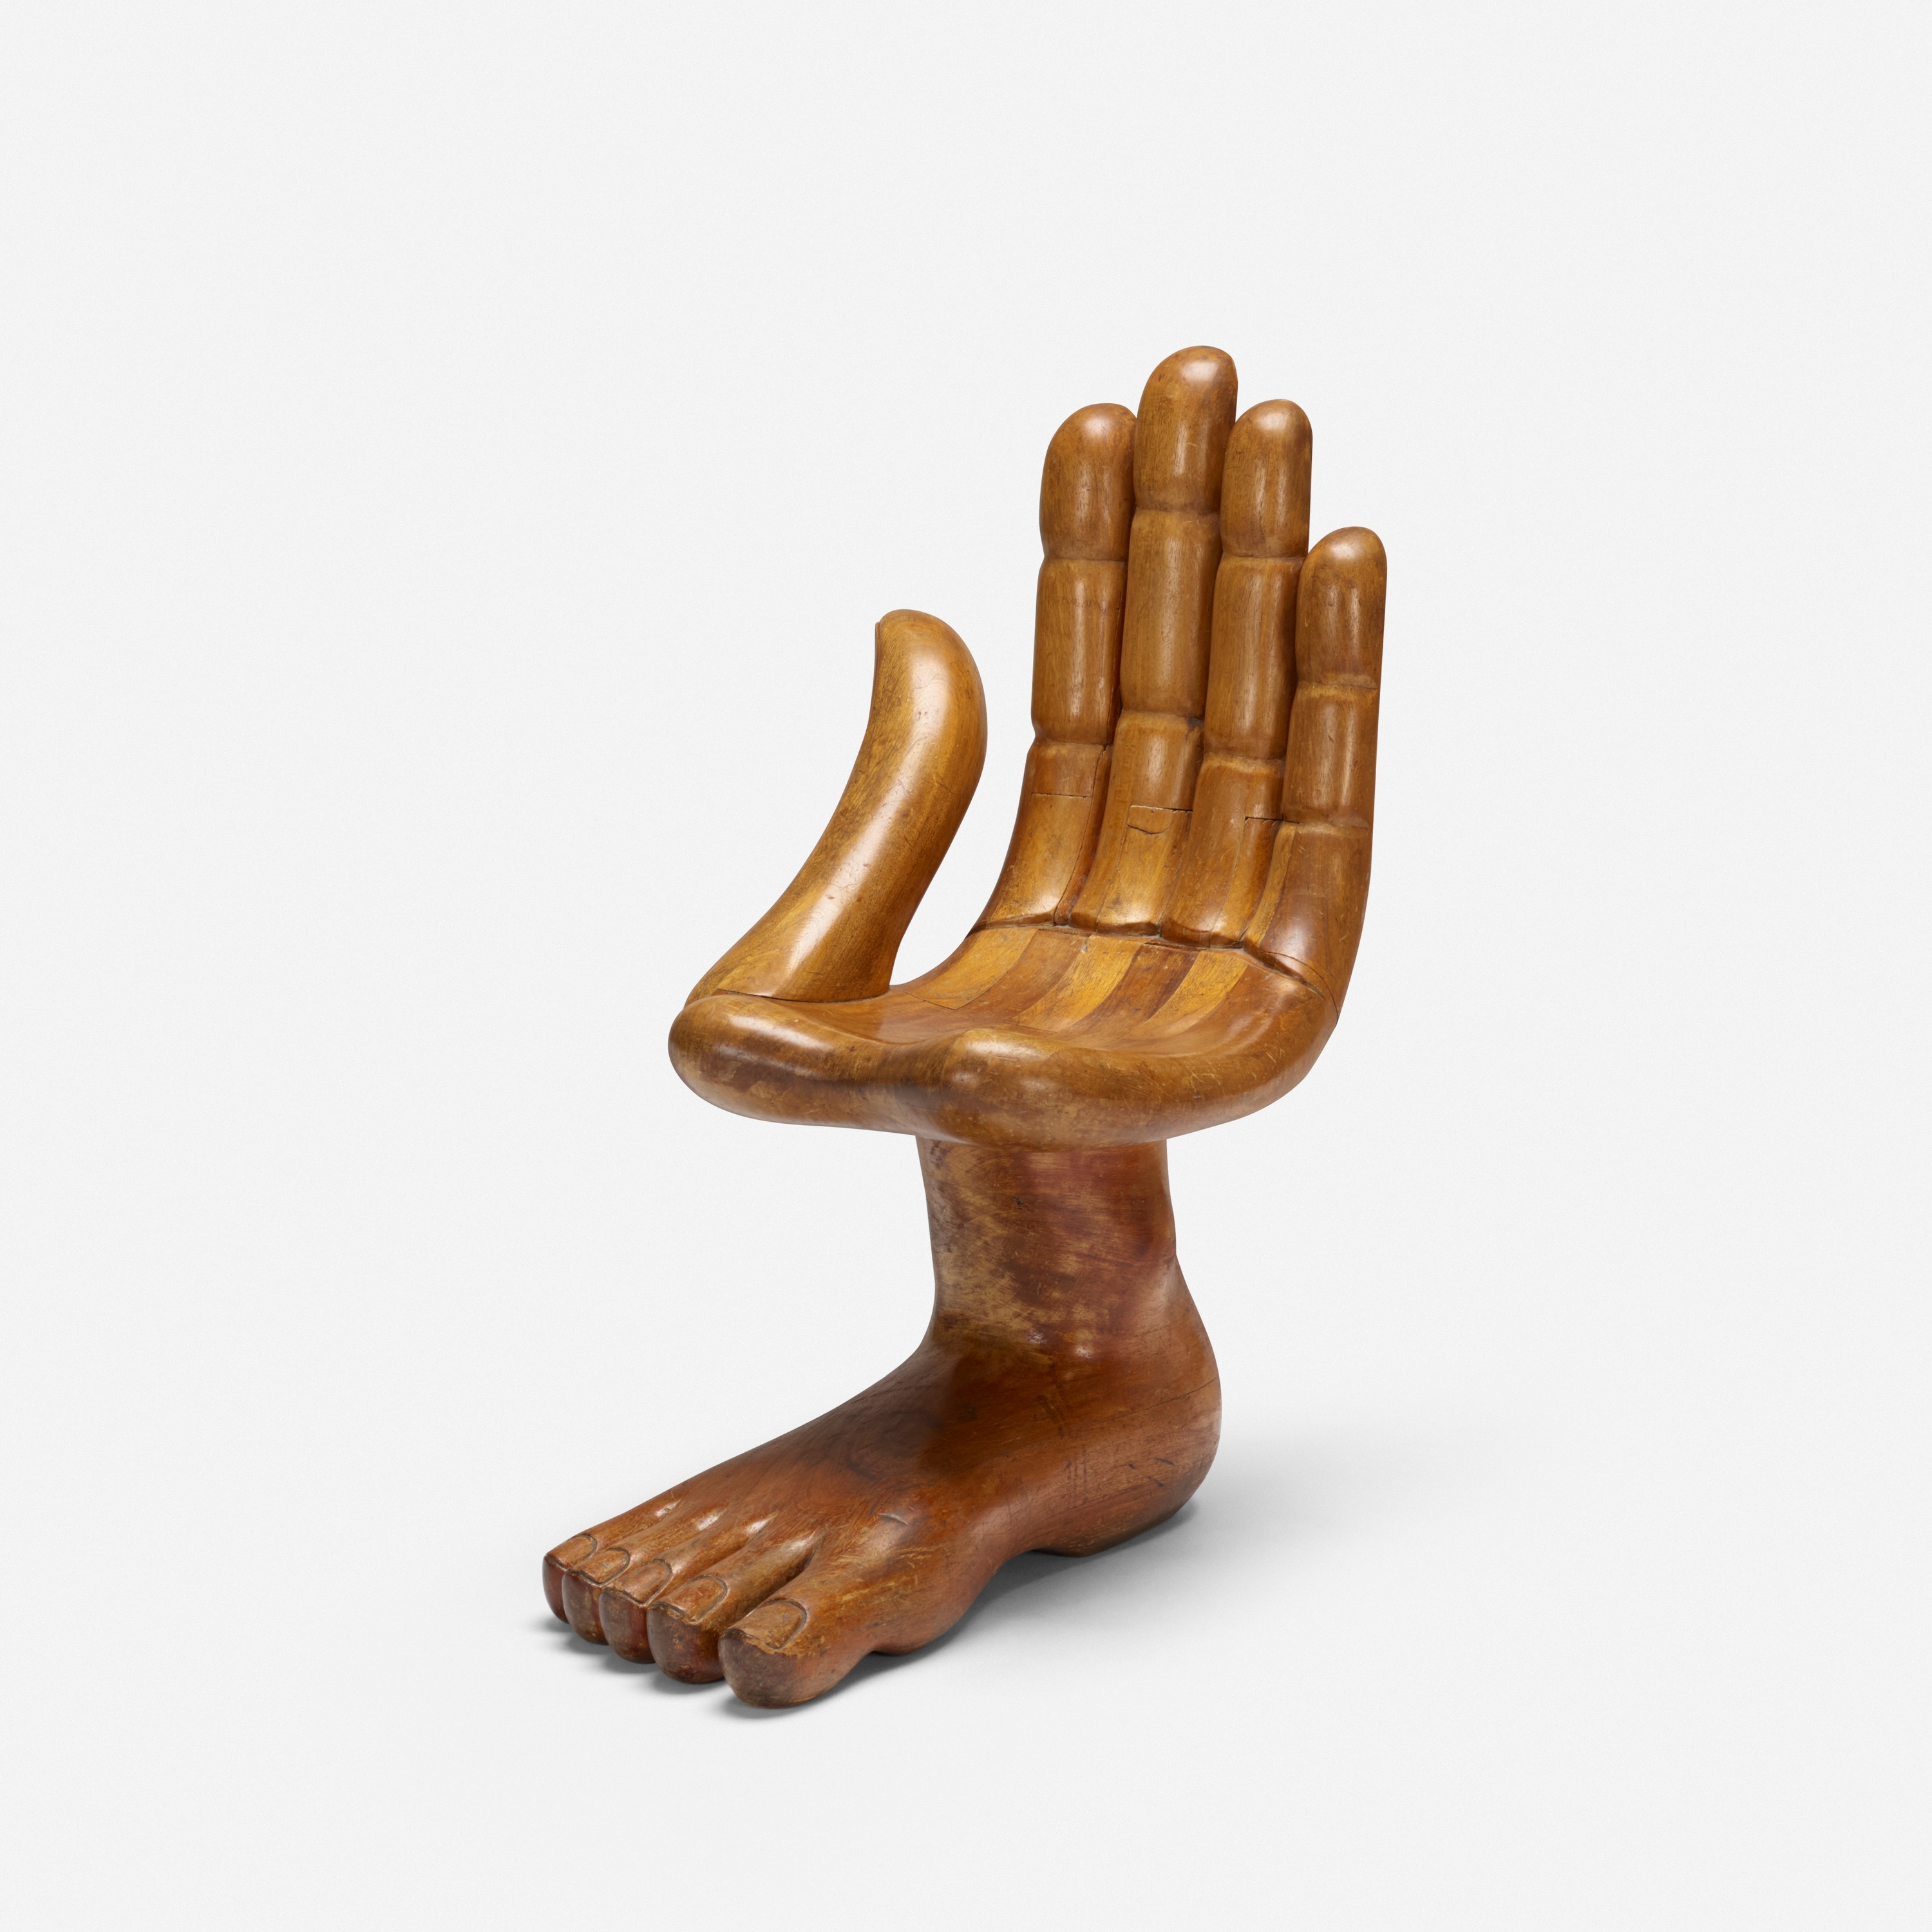 Hand Foot chair by Pedro Friedeberg, circa 1960